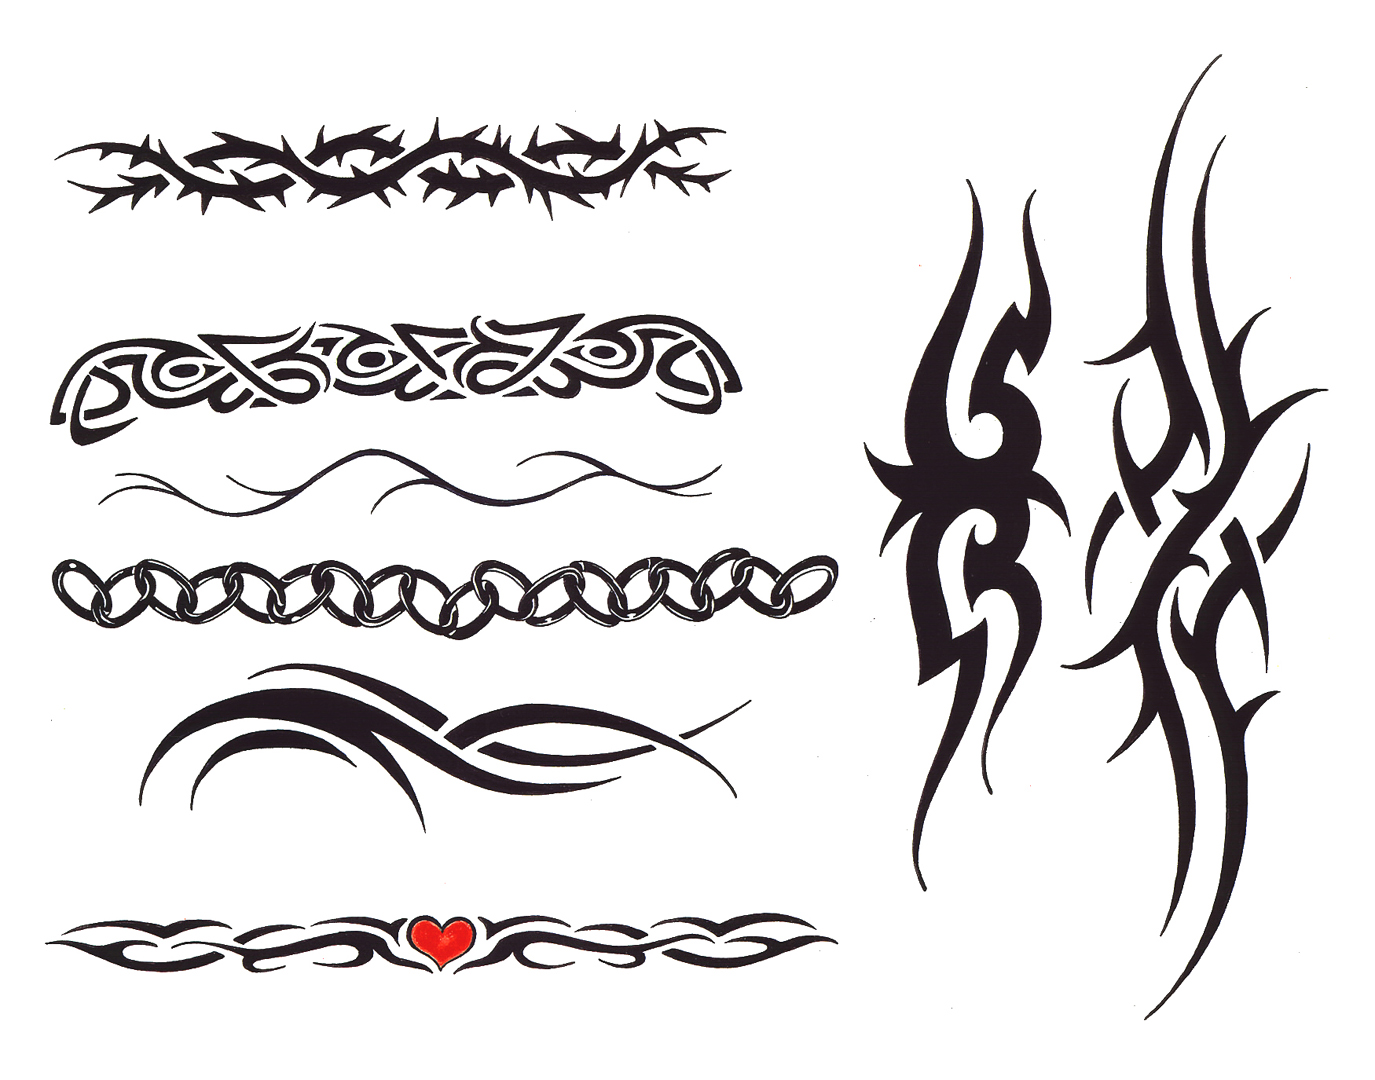 Temporary Hand Band Tattoo Sticker For Men and Woman Sample Avilable, For  Personal at Rs 25/piece in New Delhi